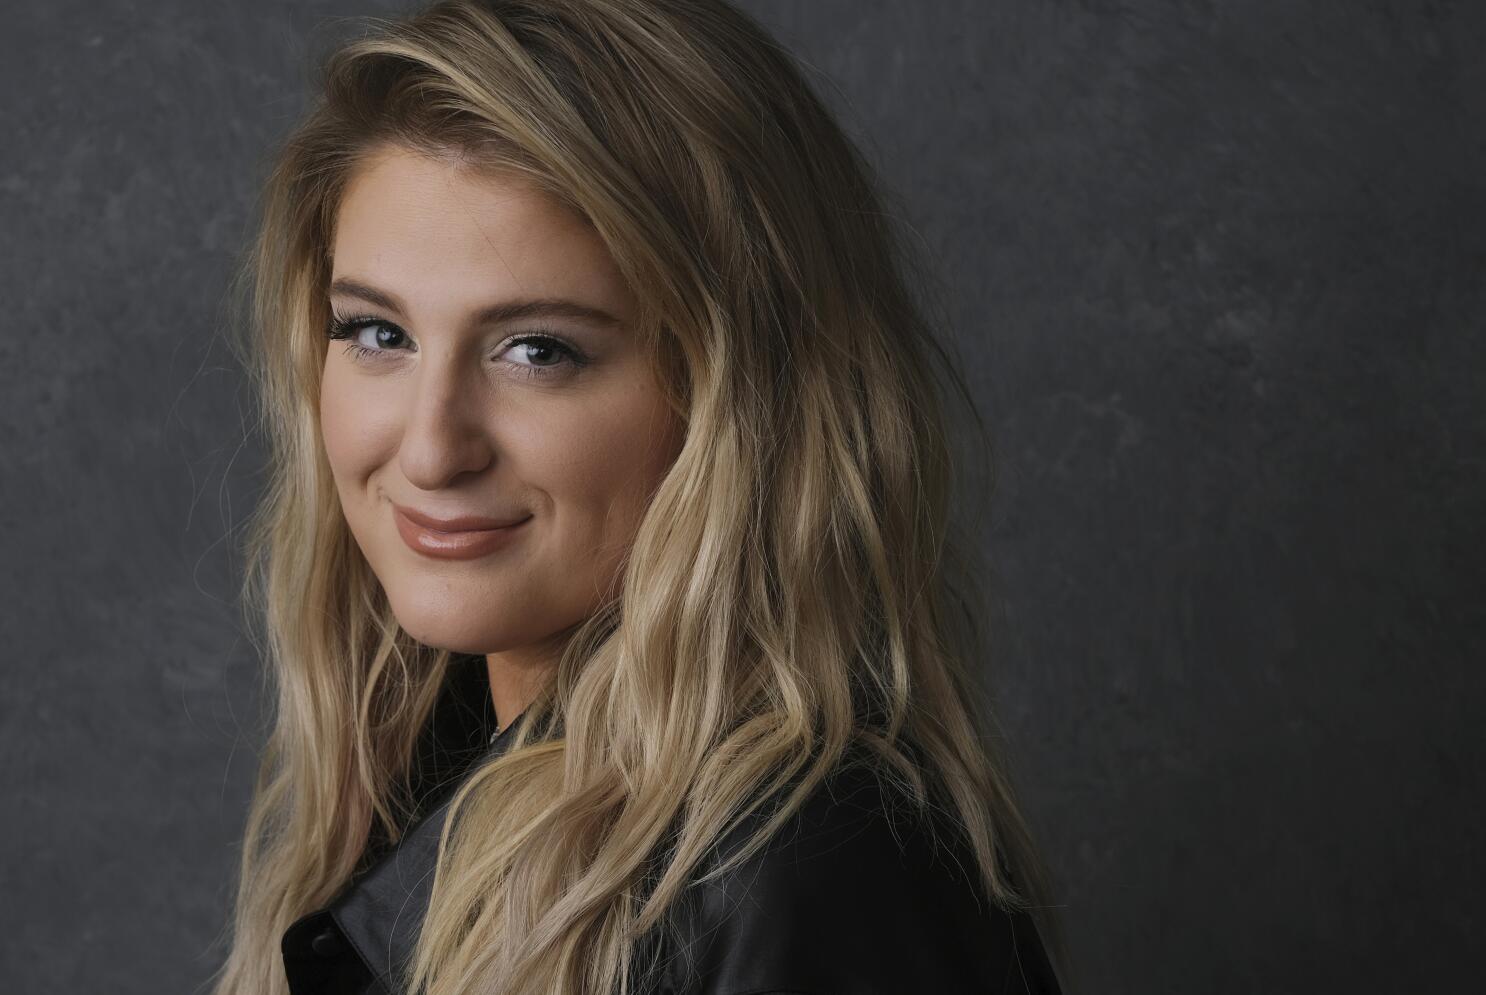 Meghan Trainor celebrates 'Made You Look' topping the charts